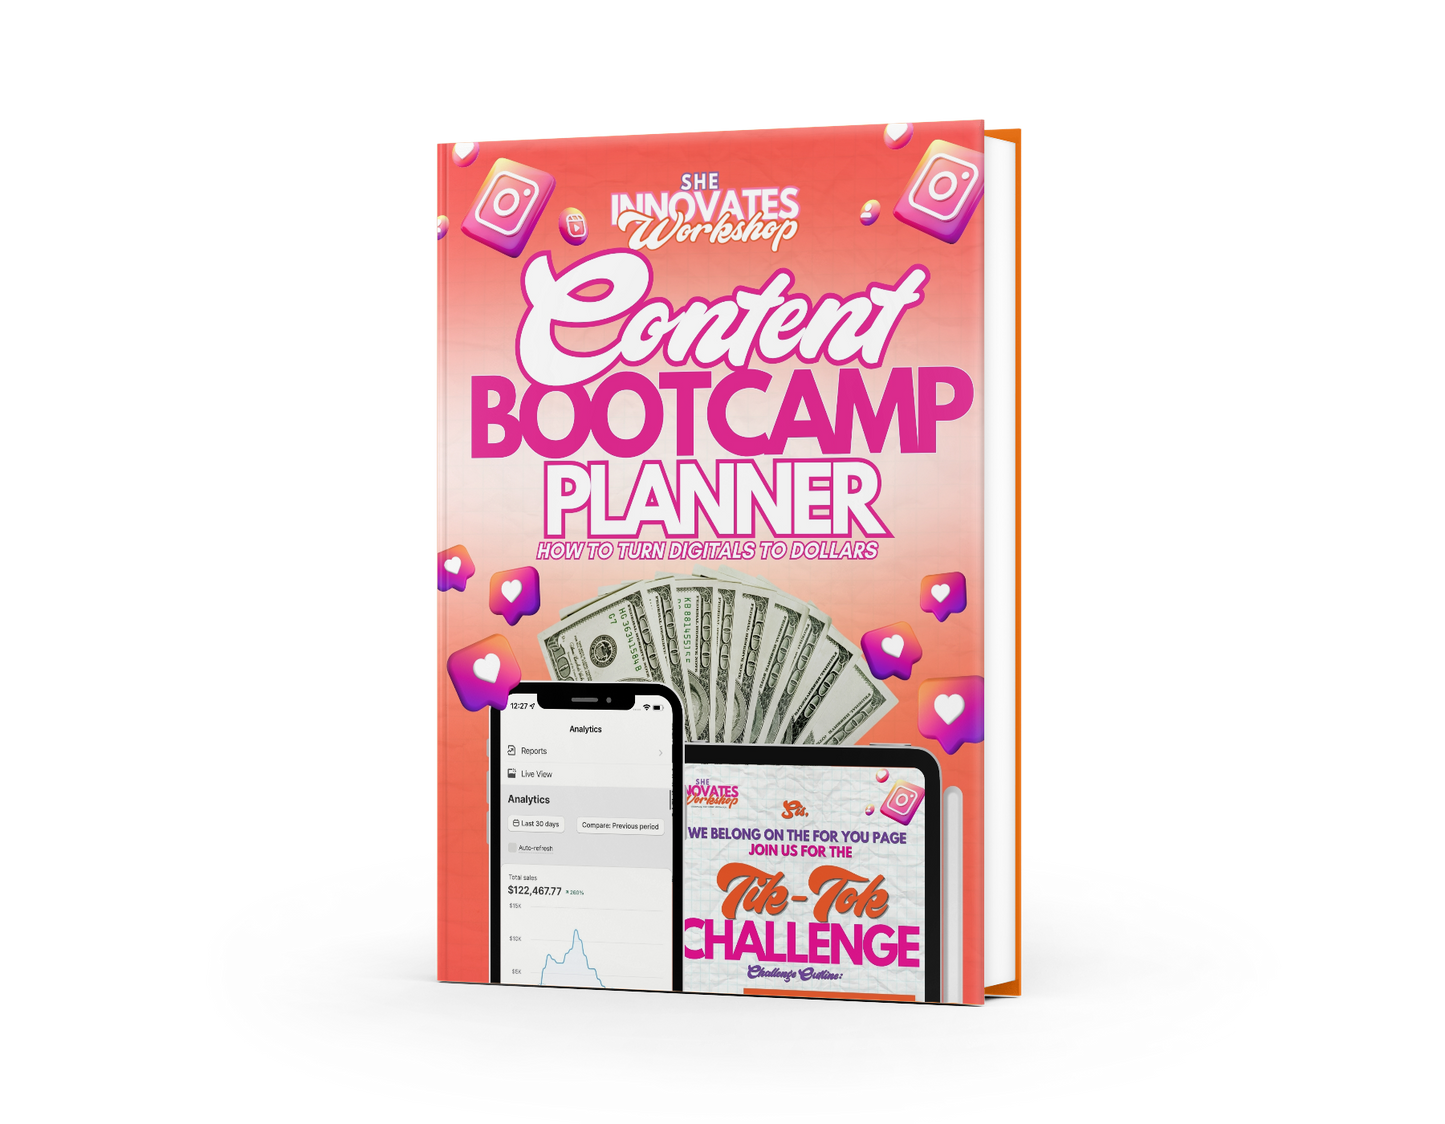 Content Bootcamp Planner